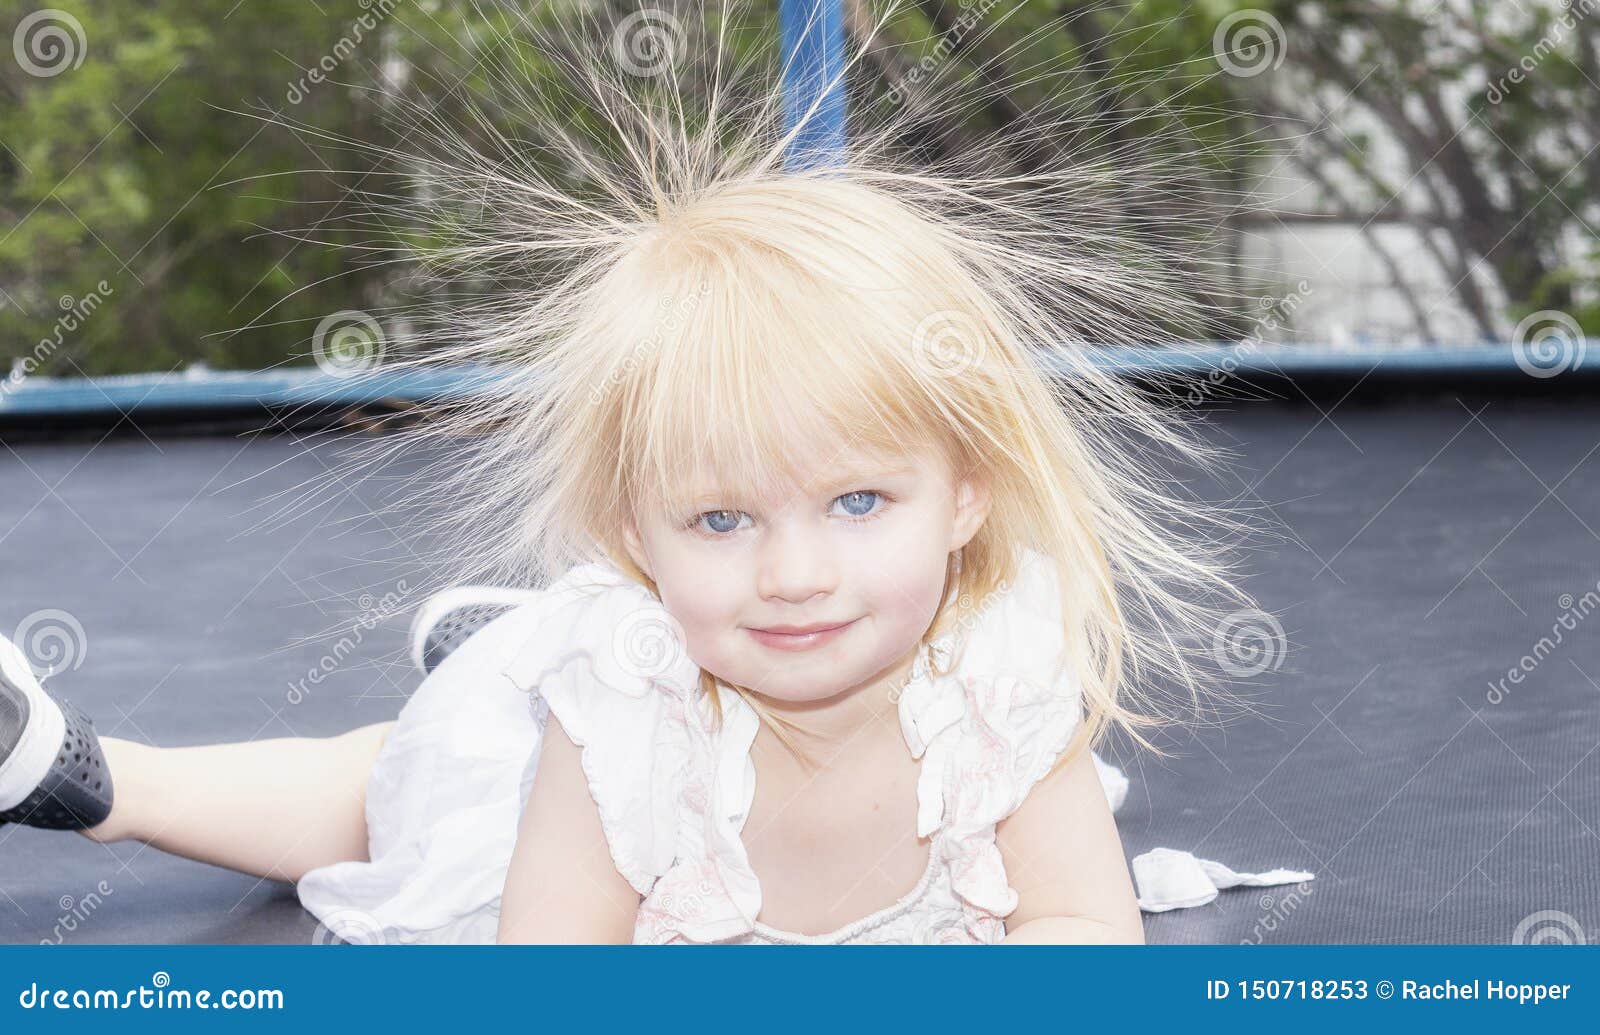 static electricity hair